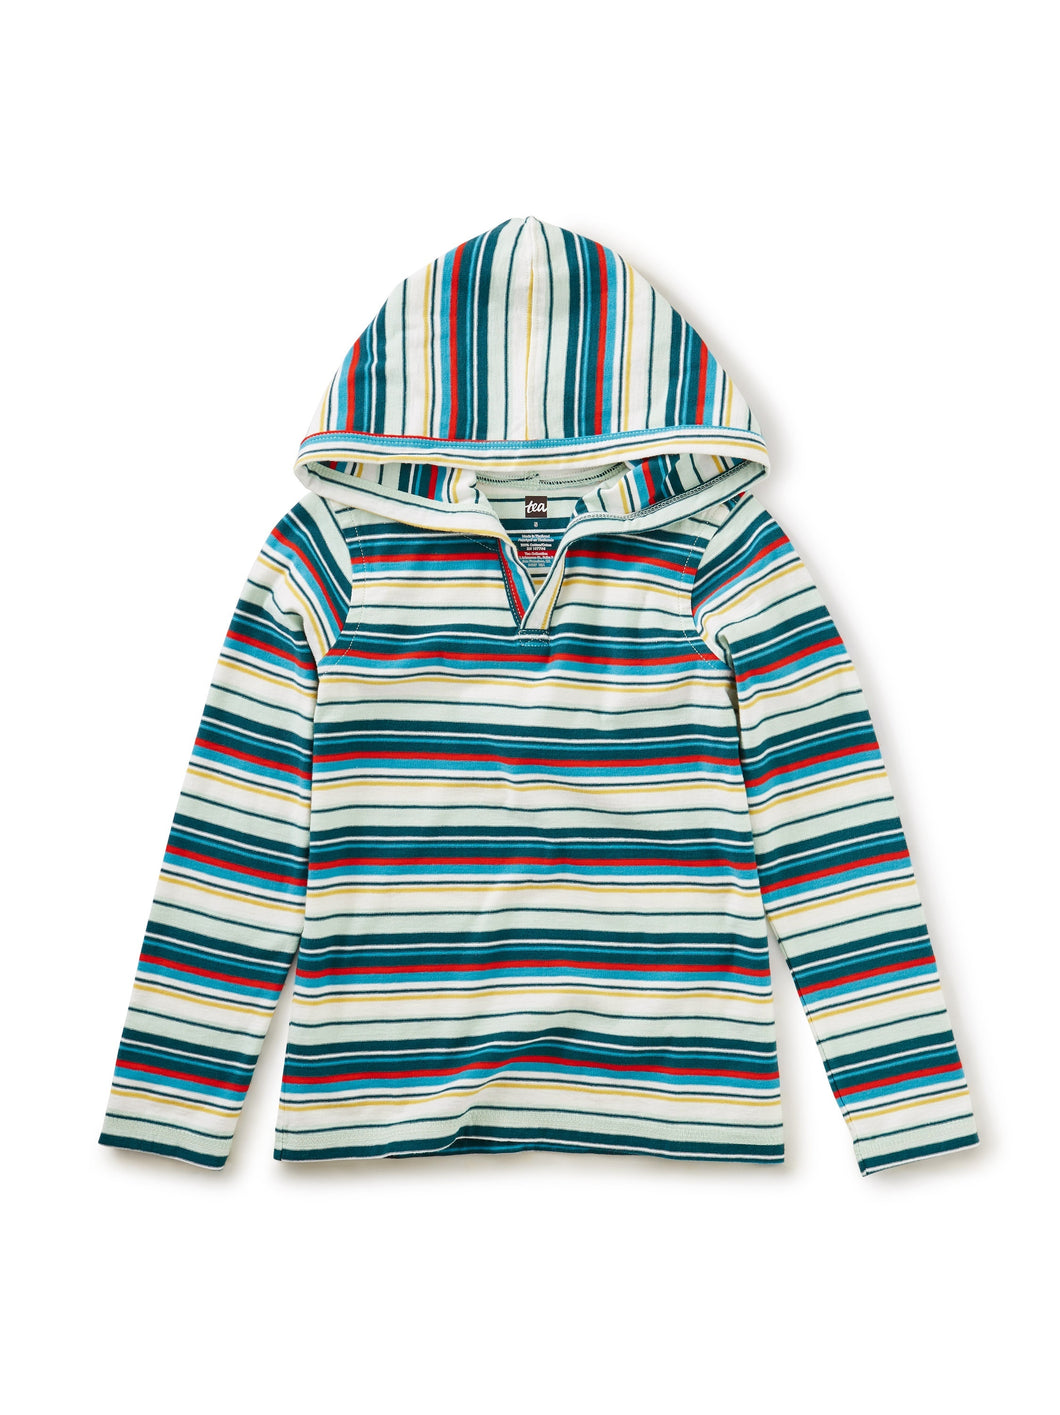 Tea Collection Striped Happy Hoodie - Mint Chip